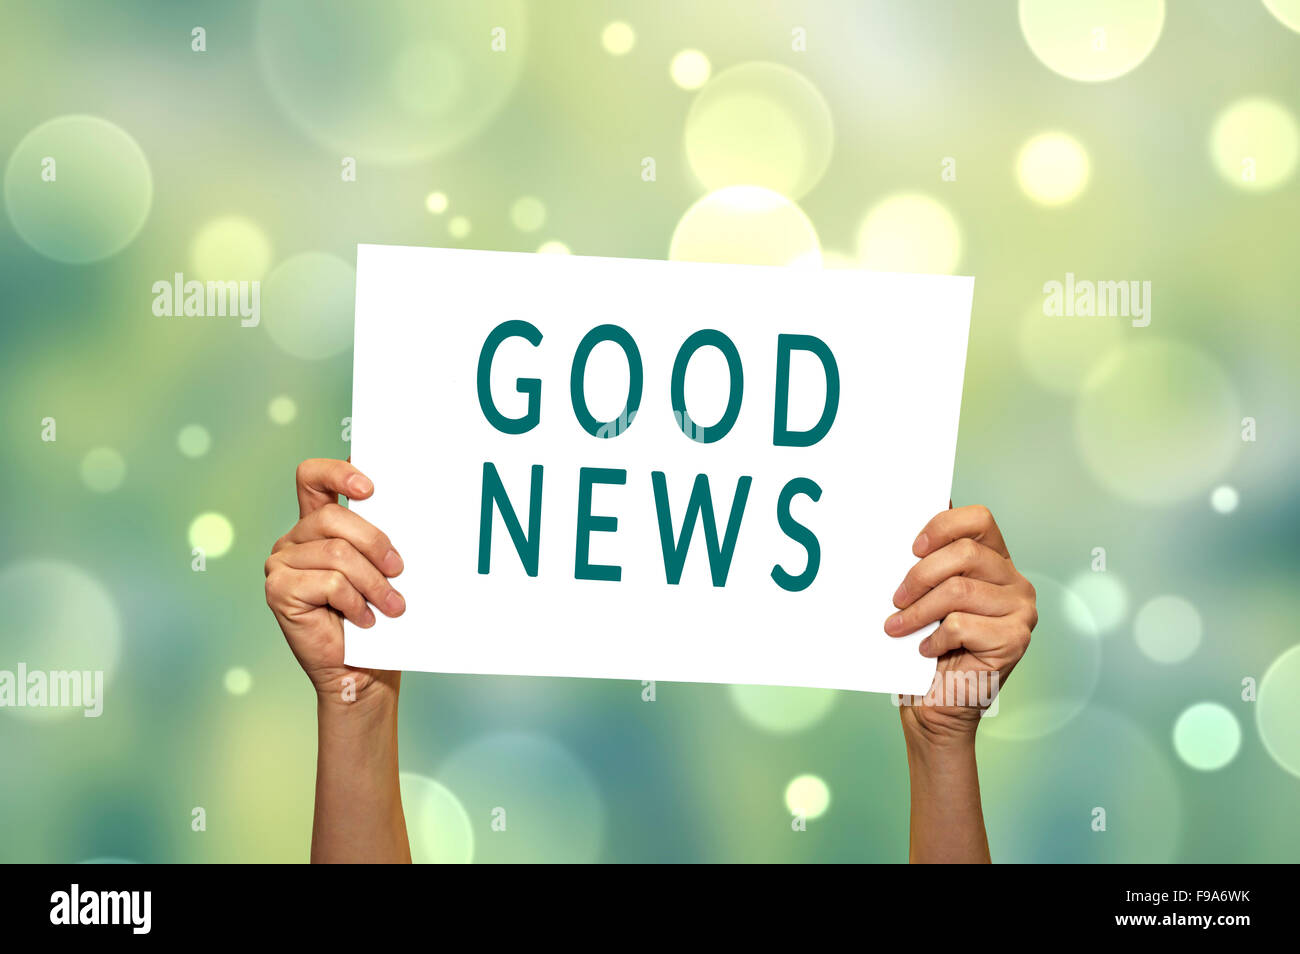 GOOD NEWS card in hand with abstract light background. Selective focus. Stock Photo